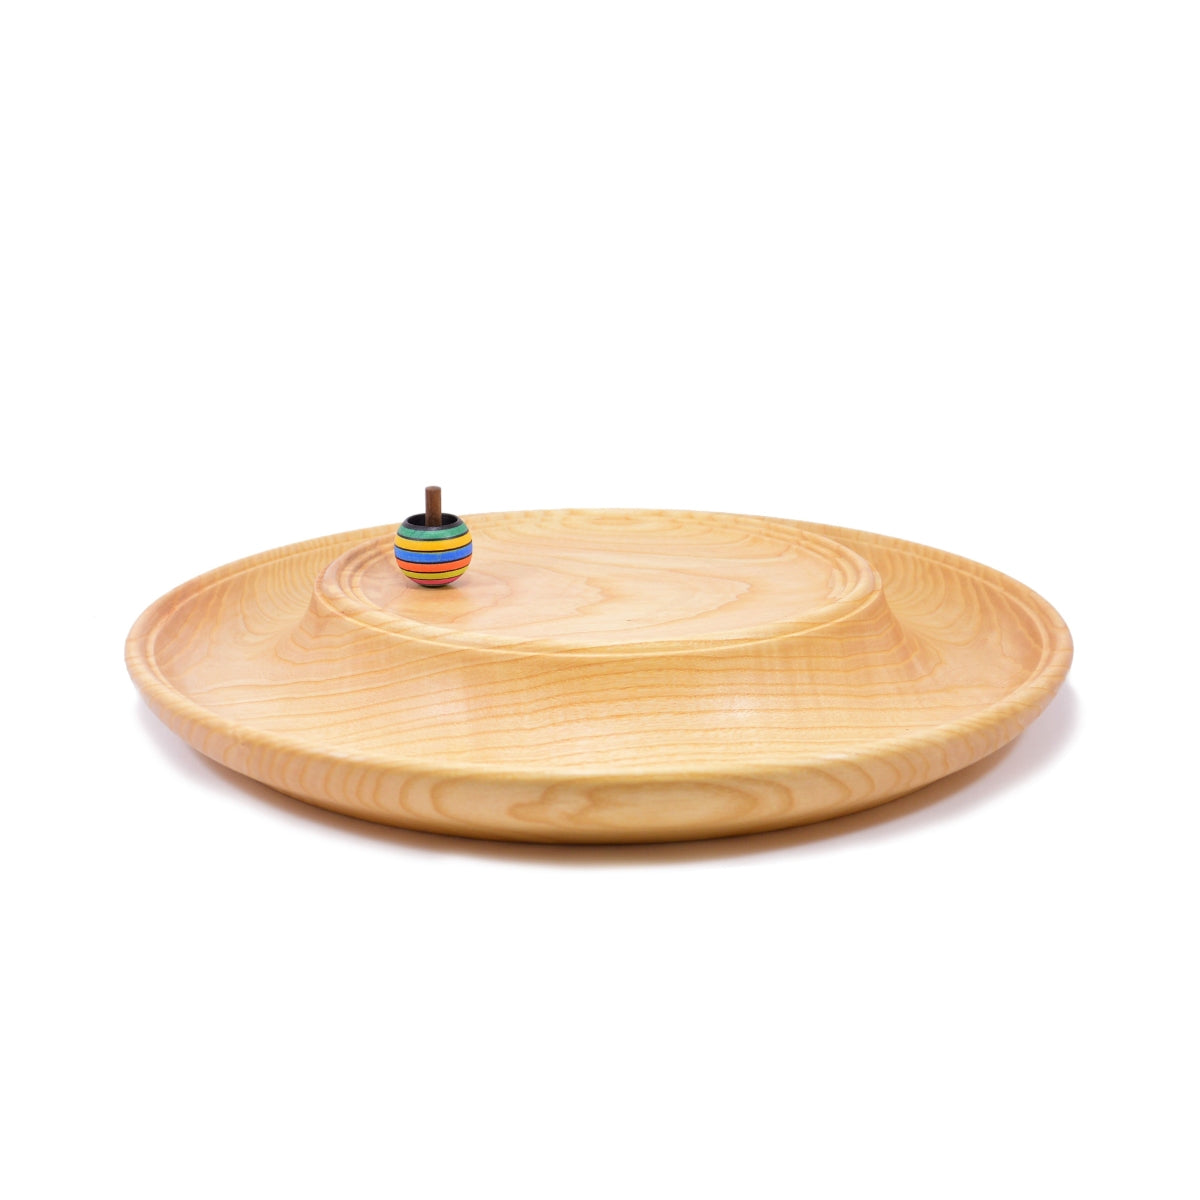 Mader Wooden Rondell for Spinning Tops Ash